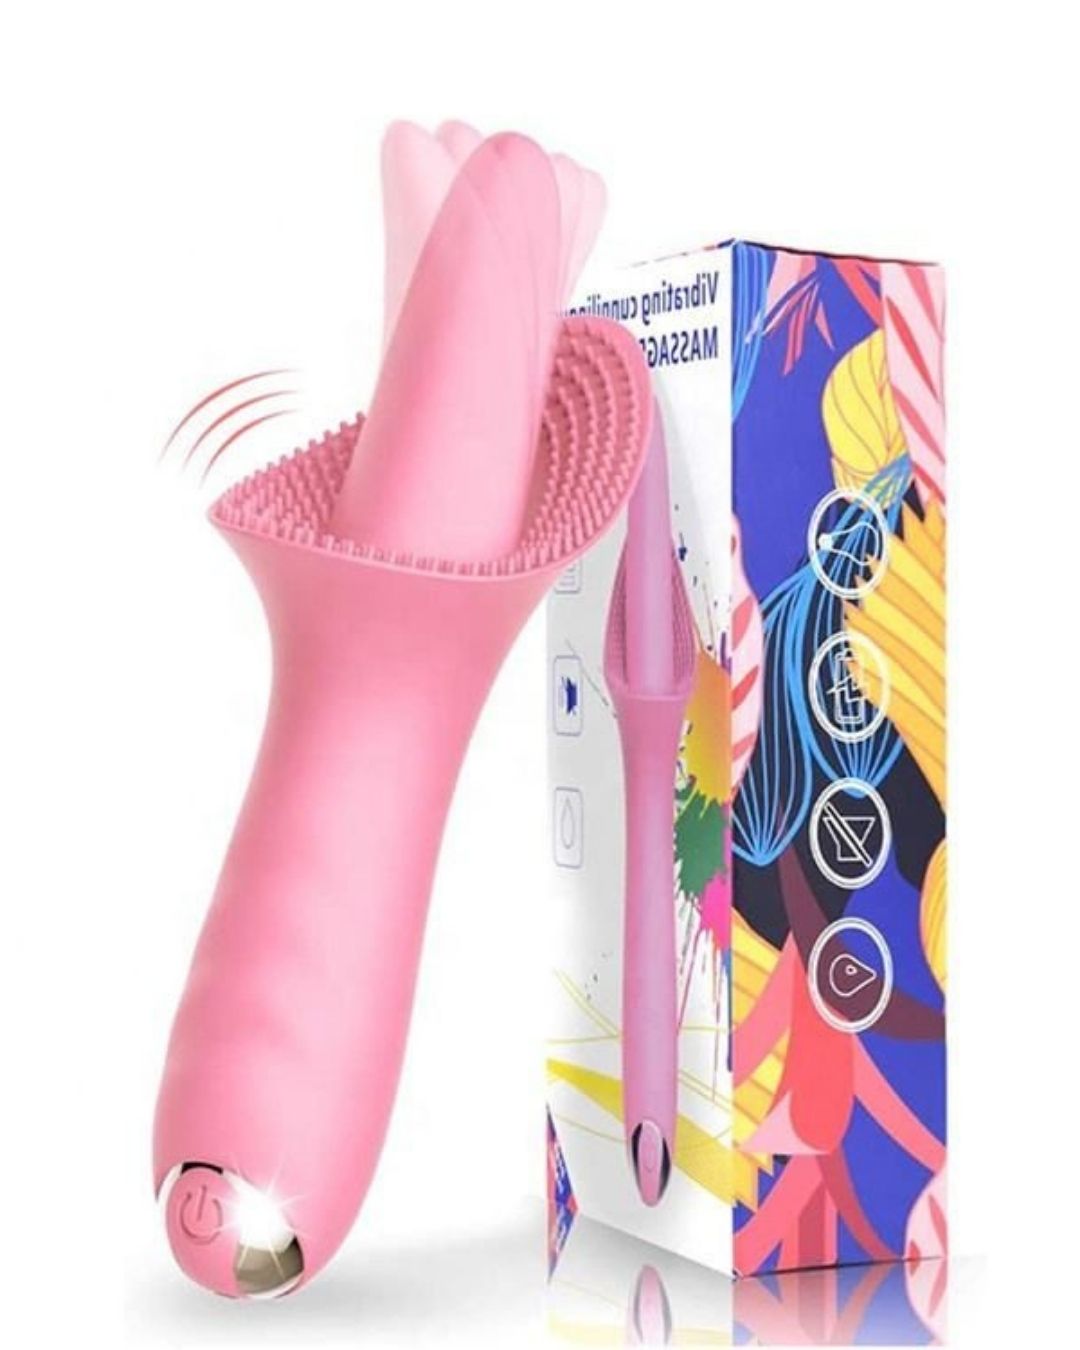 Clitoral Stimulation Toy for Women